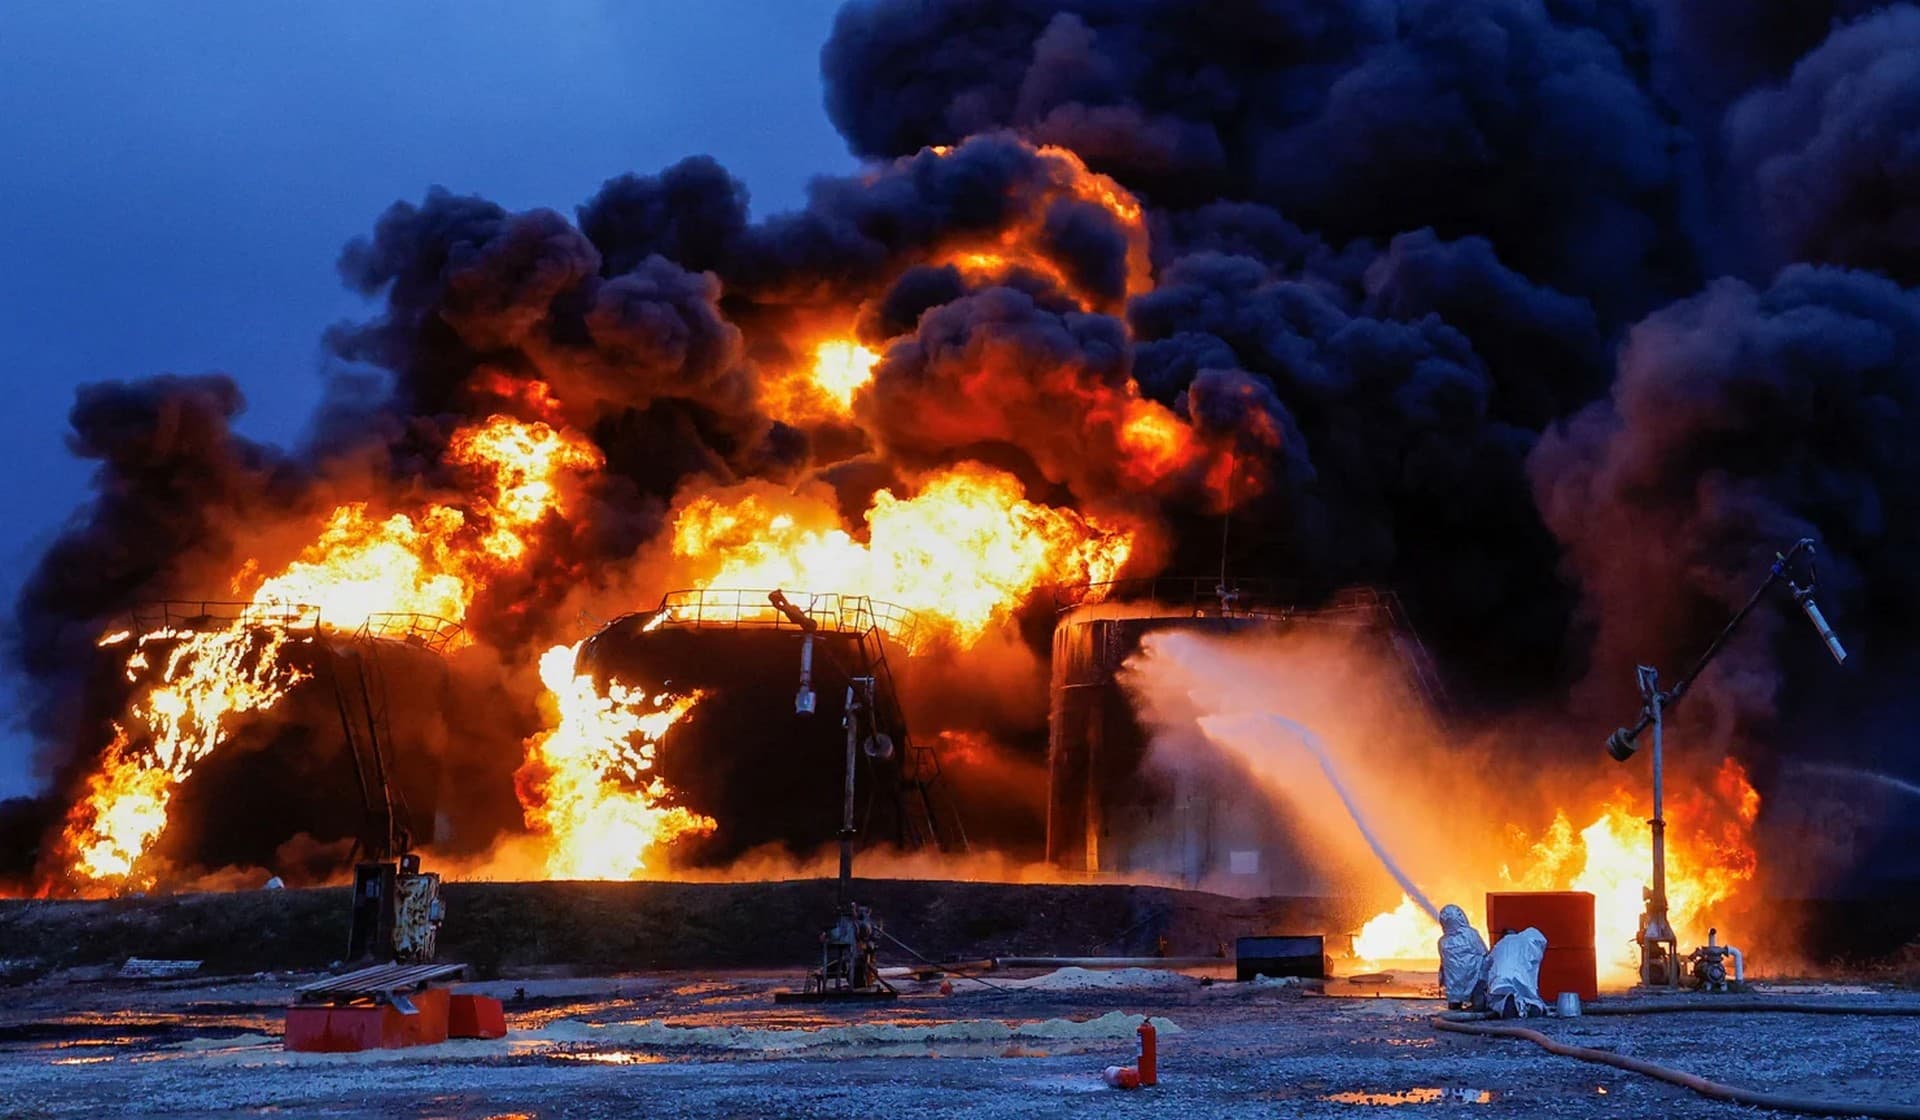 Firefighters work to extinguish fire following recent shelling at an oil storage facility in Shakhtarsk